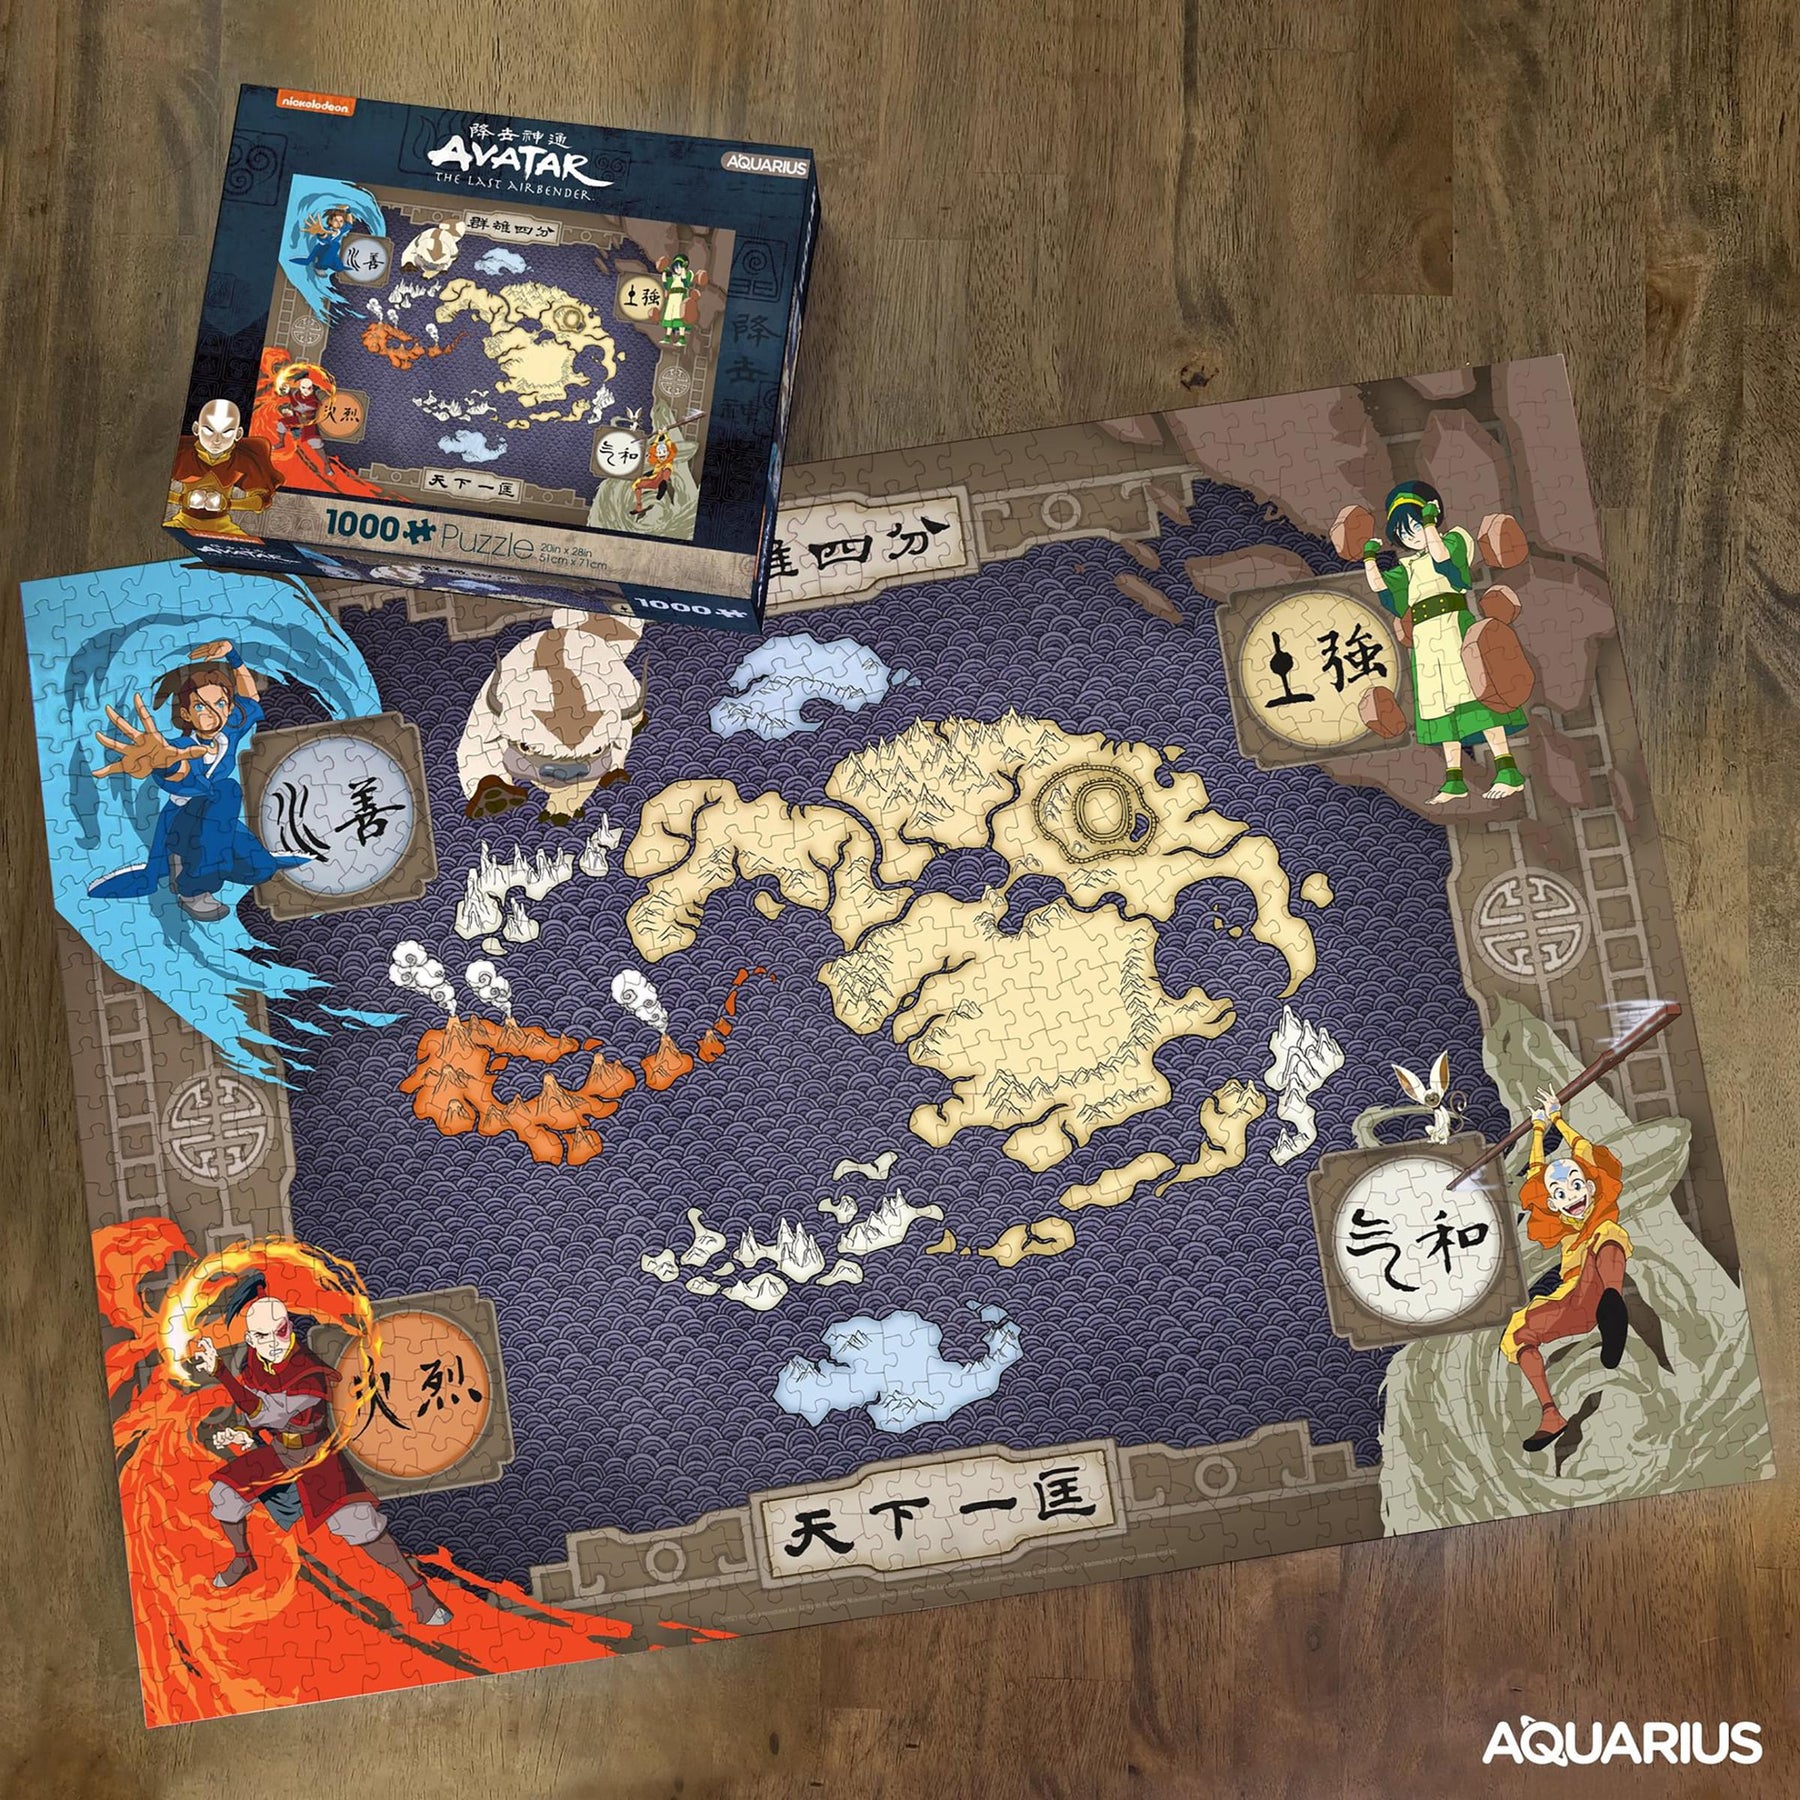 Avatar The Last Airbender 1000 Piece Jigsaw Puzzle | Free Shipping